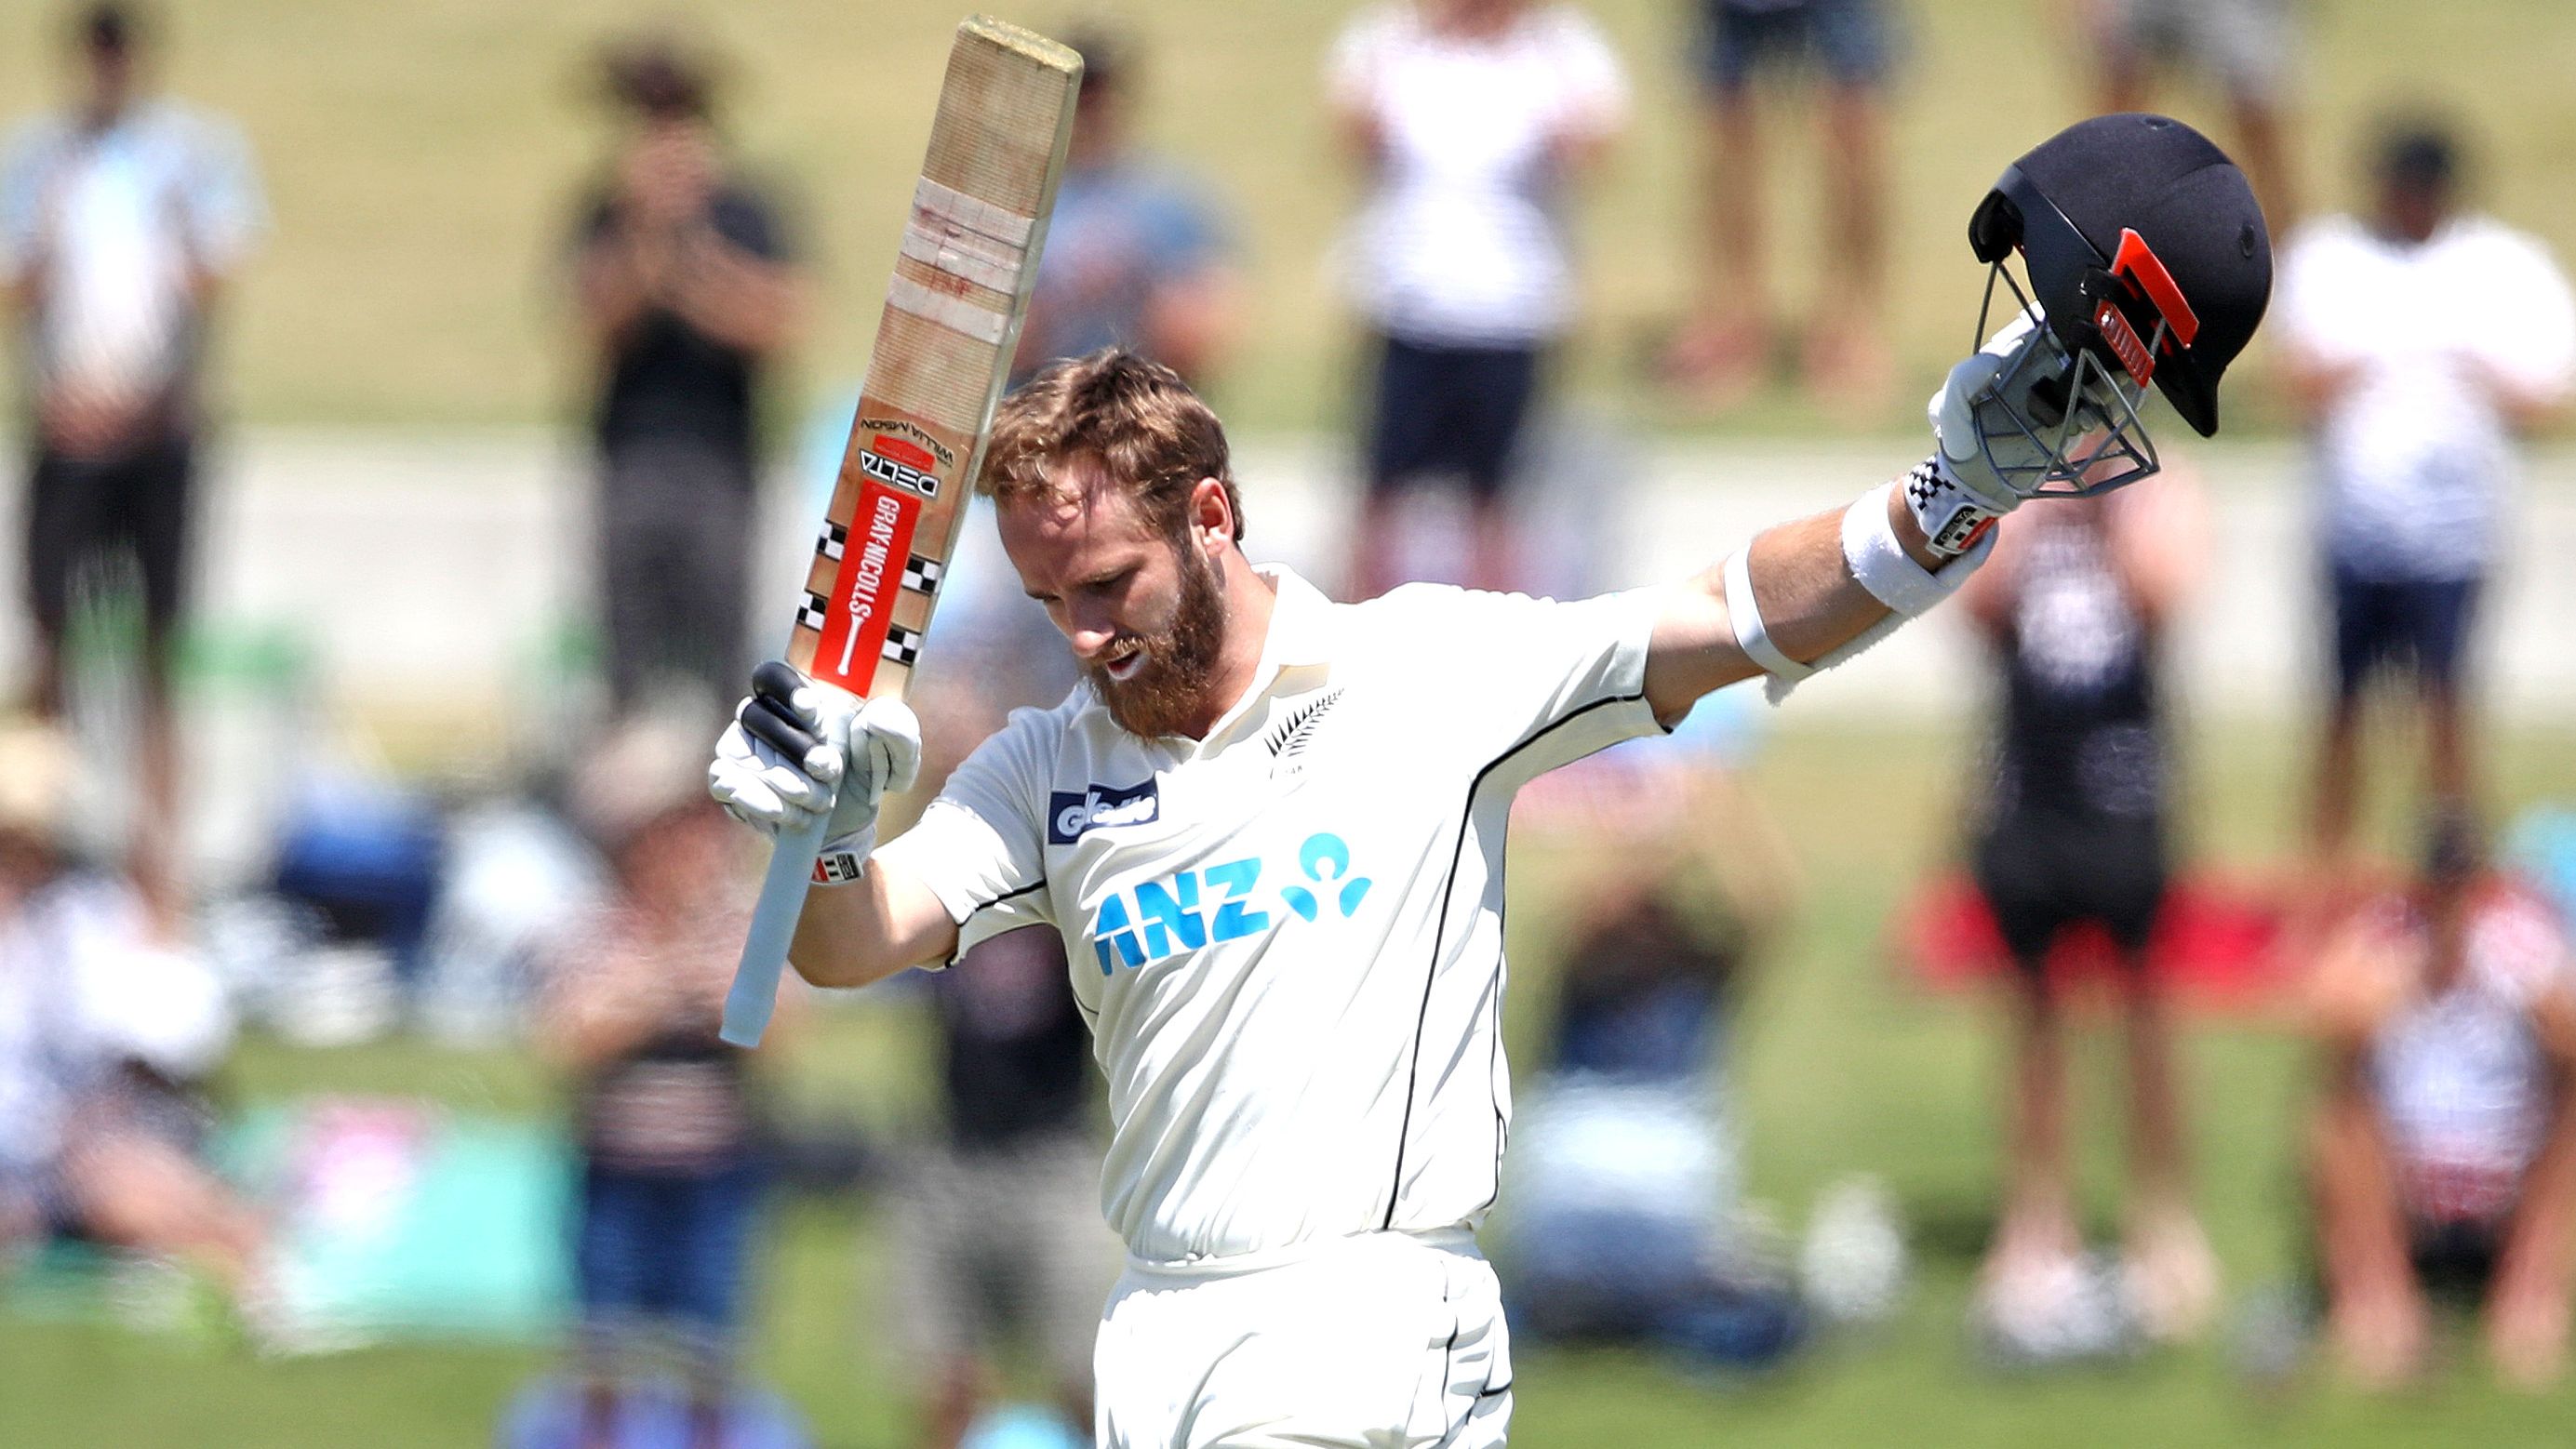 New dad Kane Williamson scores another century as New Zealand takes control of first Test v Pakistan